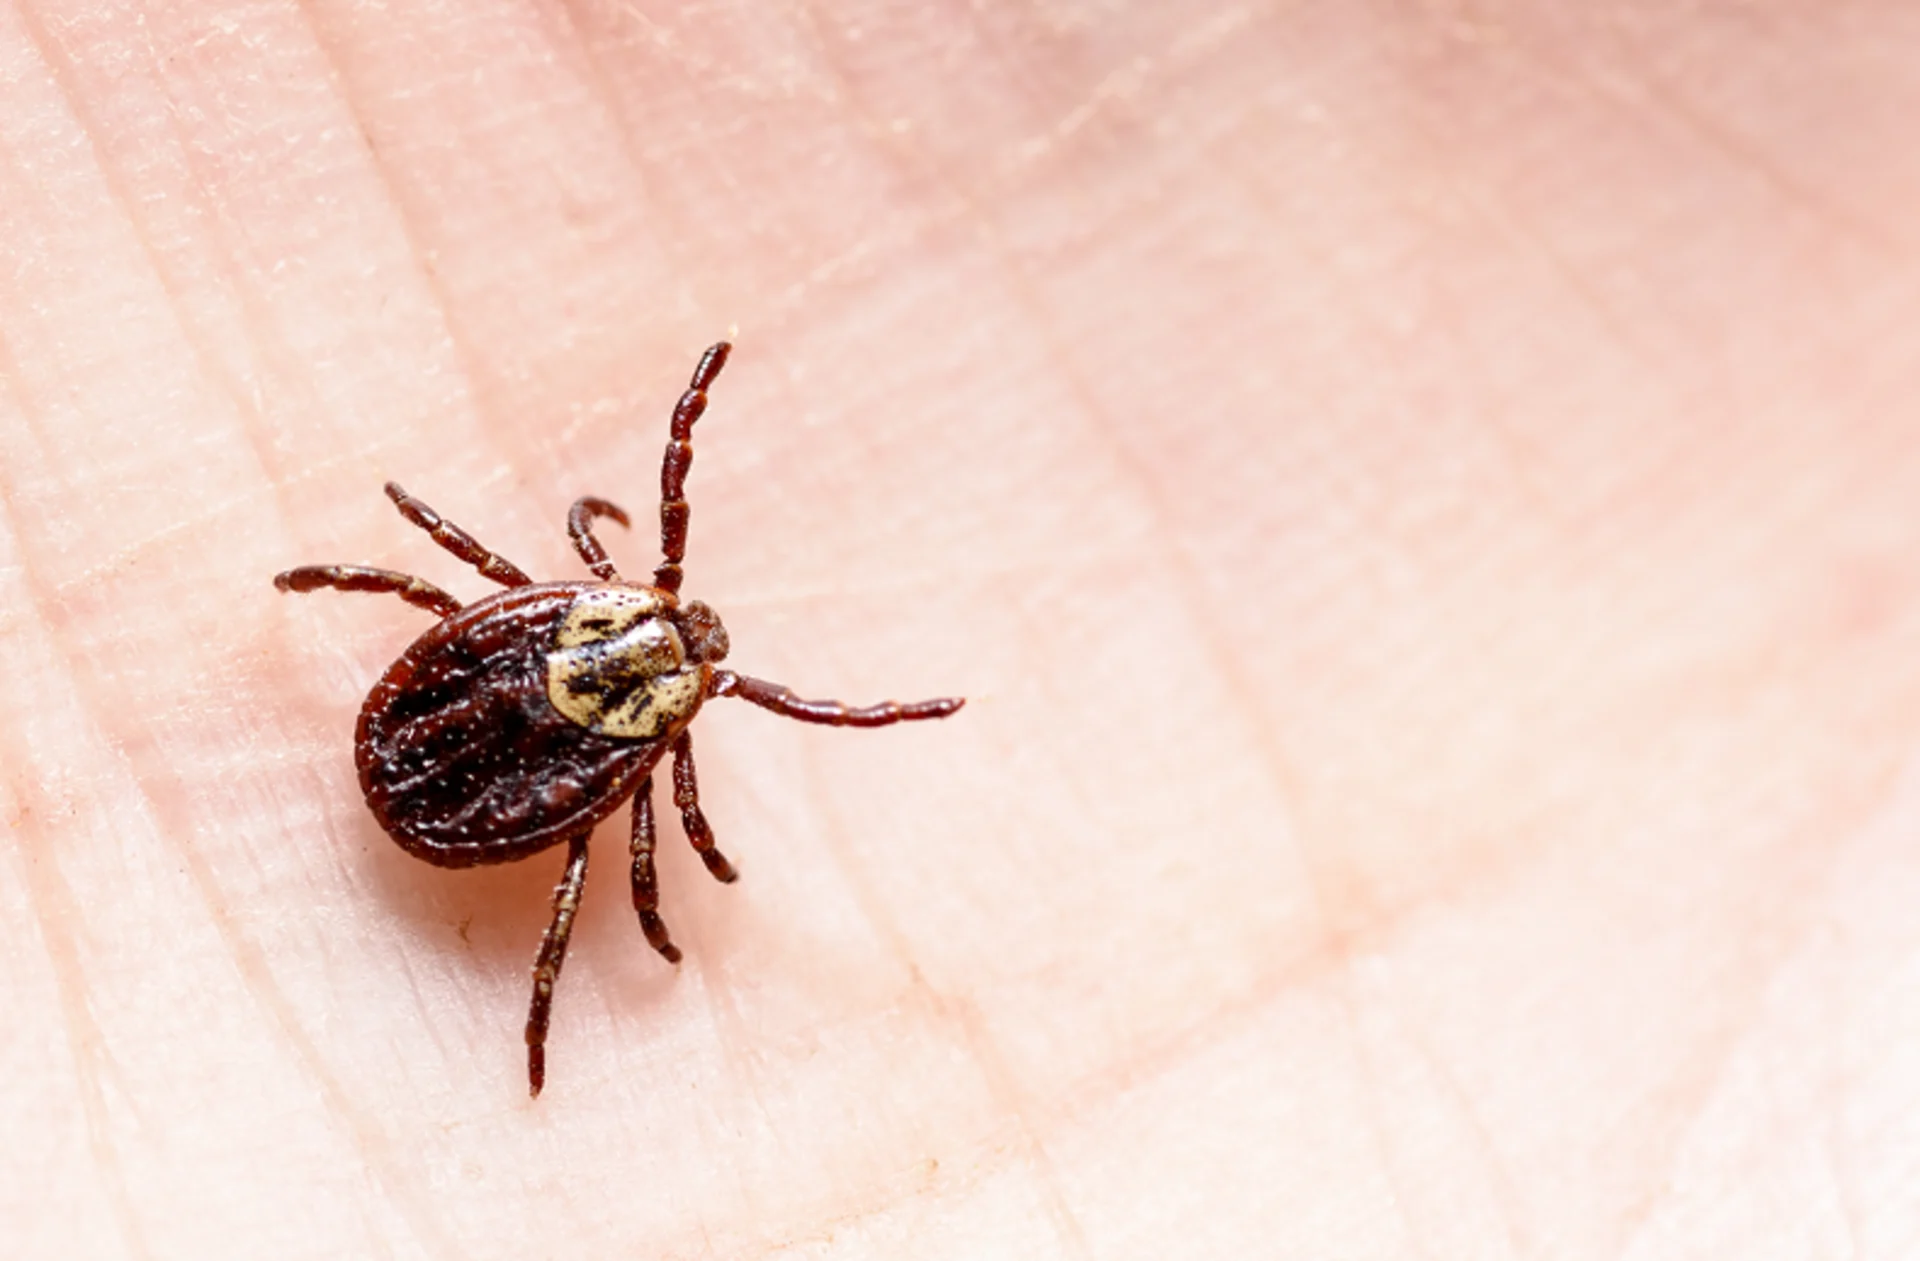 Friendly reminder: Ticks can still be active in winter